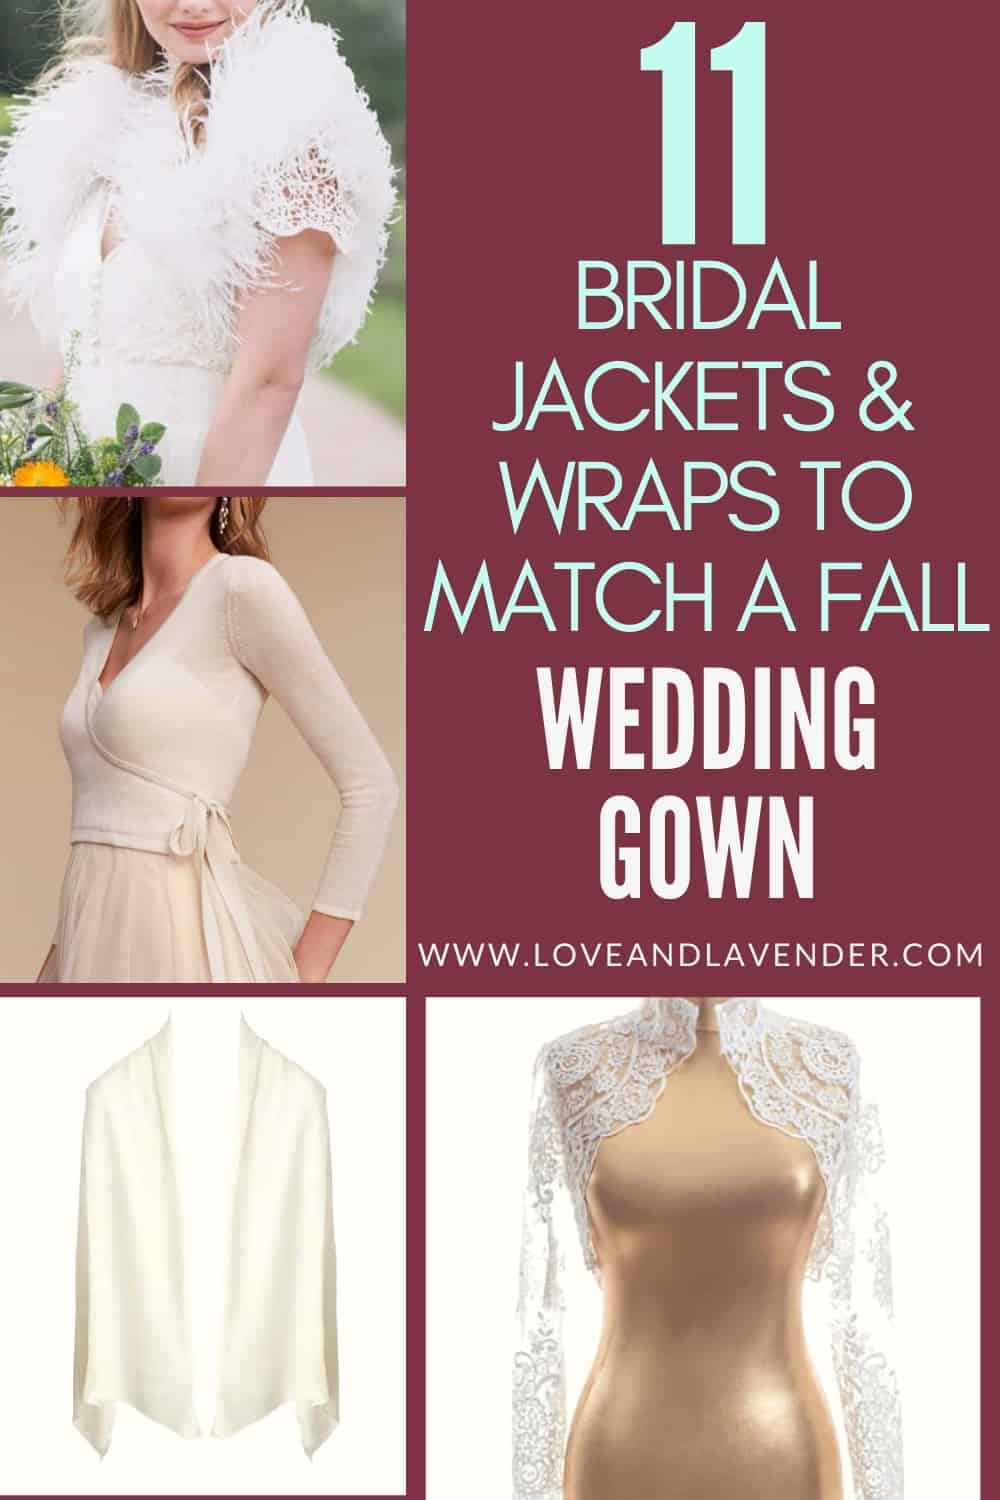 Wraps to Match a Fall Wedding Gown ...